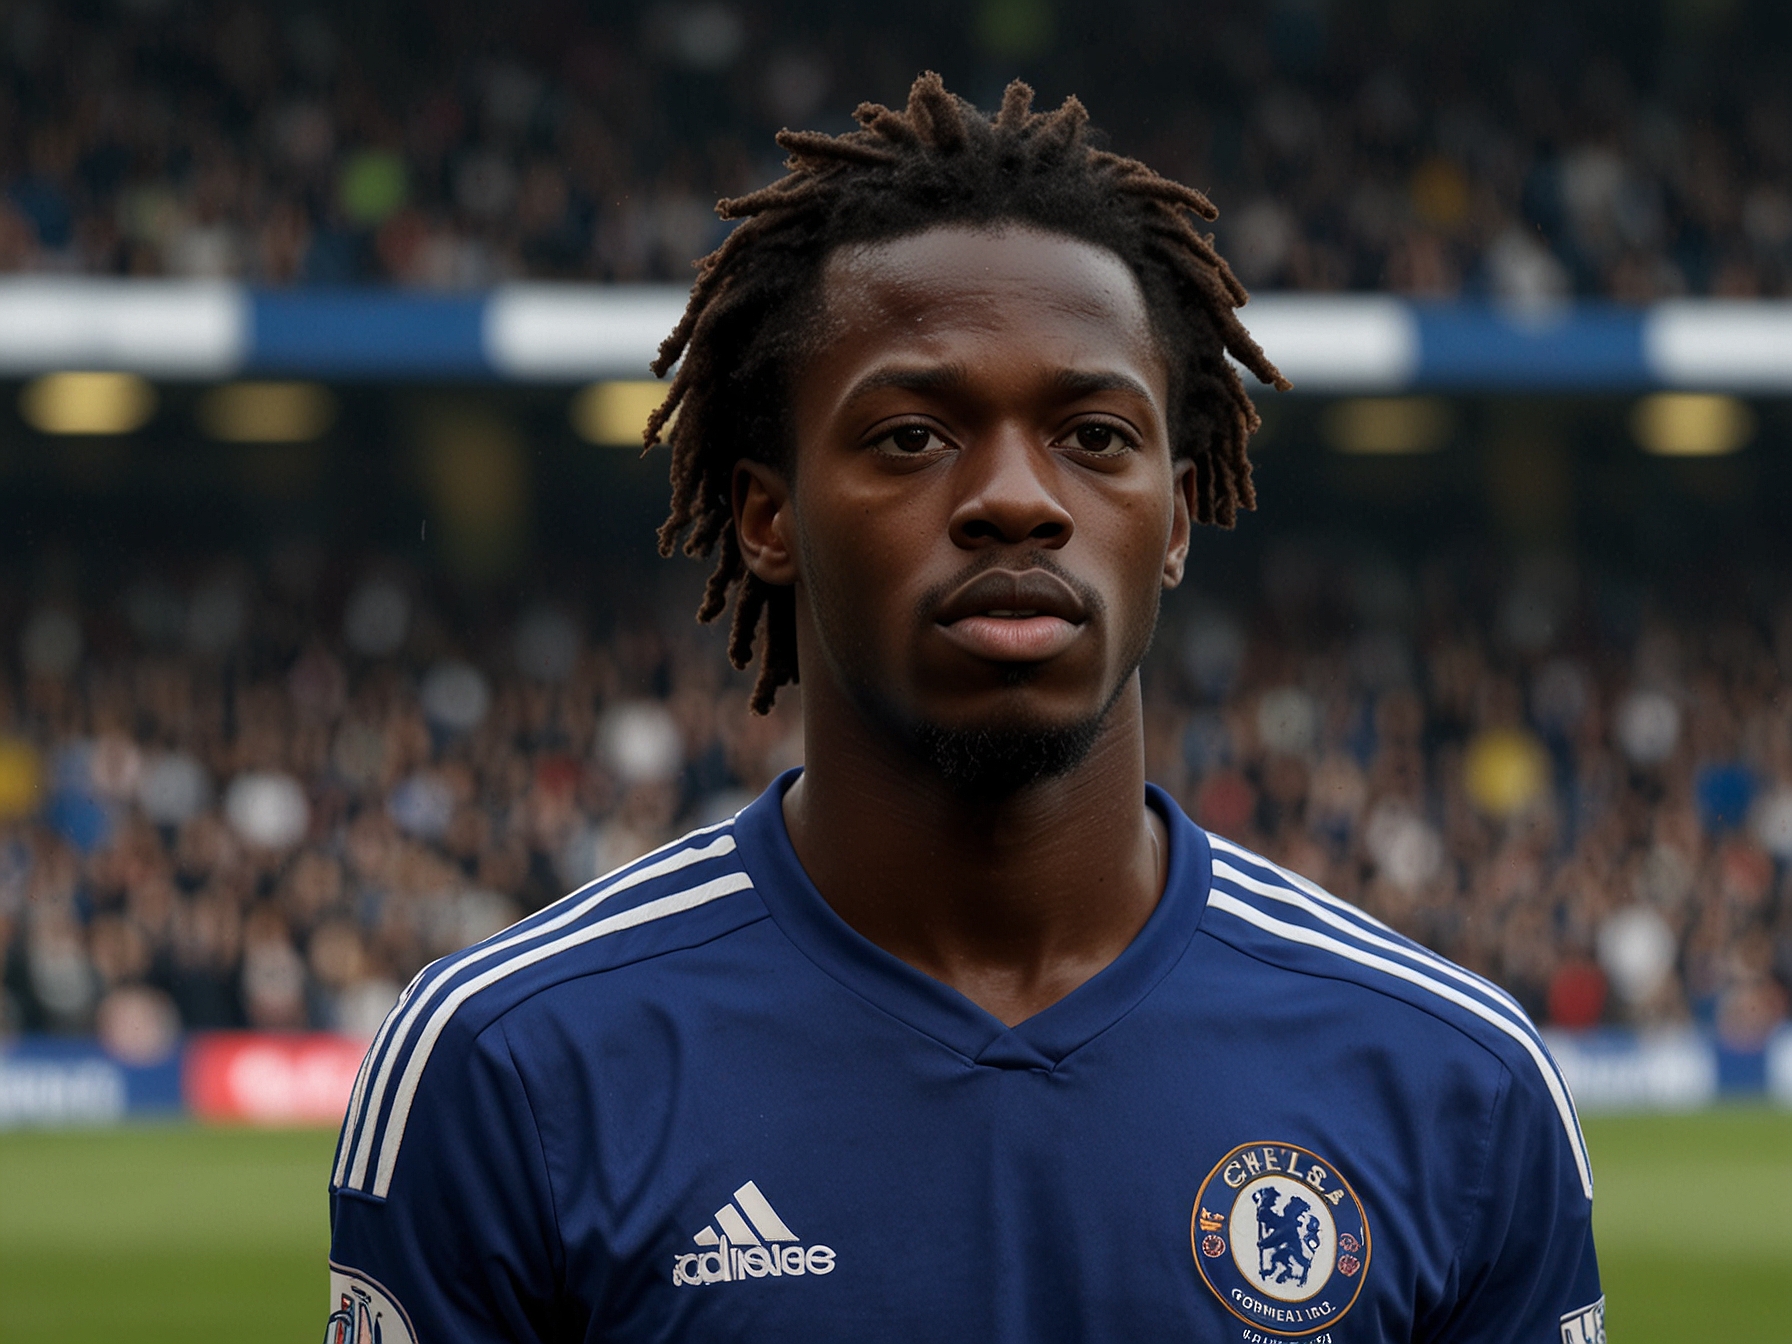 An image showing Trevoh Chalobah during a match for Chelsea FC.